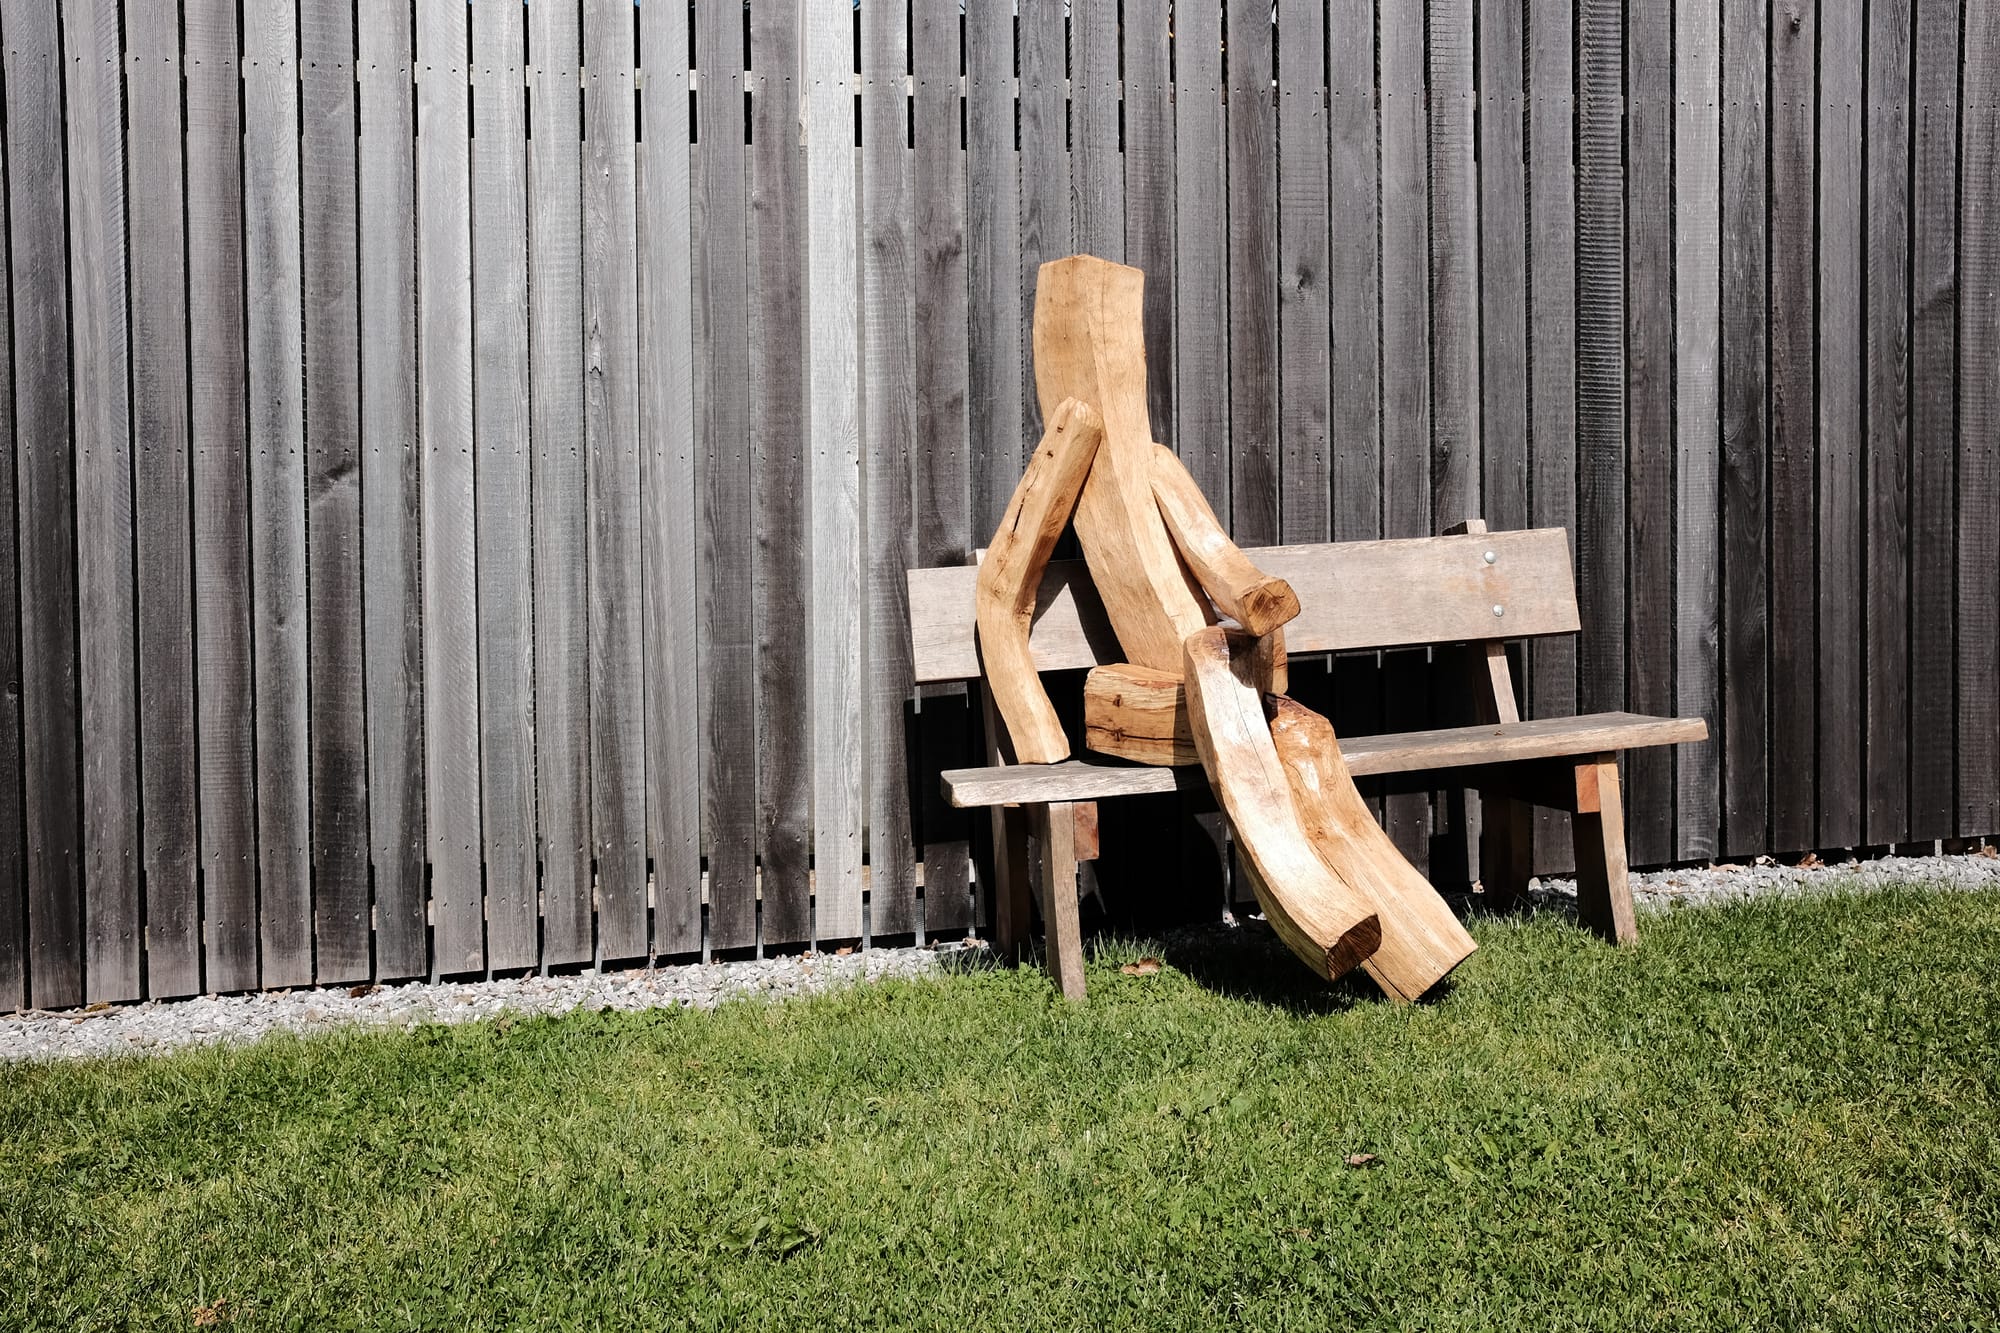 A light brown, angular wooden sculpture of a human figure sits on a brown wooden bench against the grey wooden slats of a barn